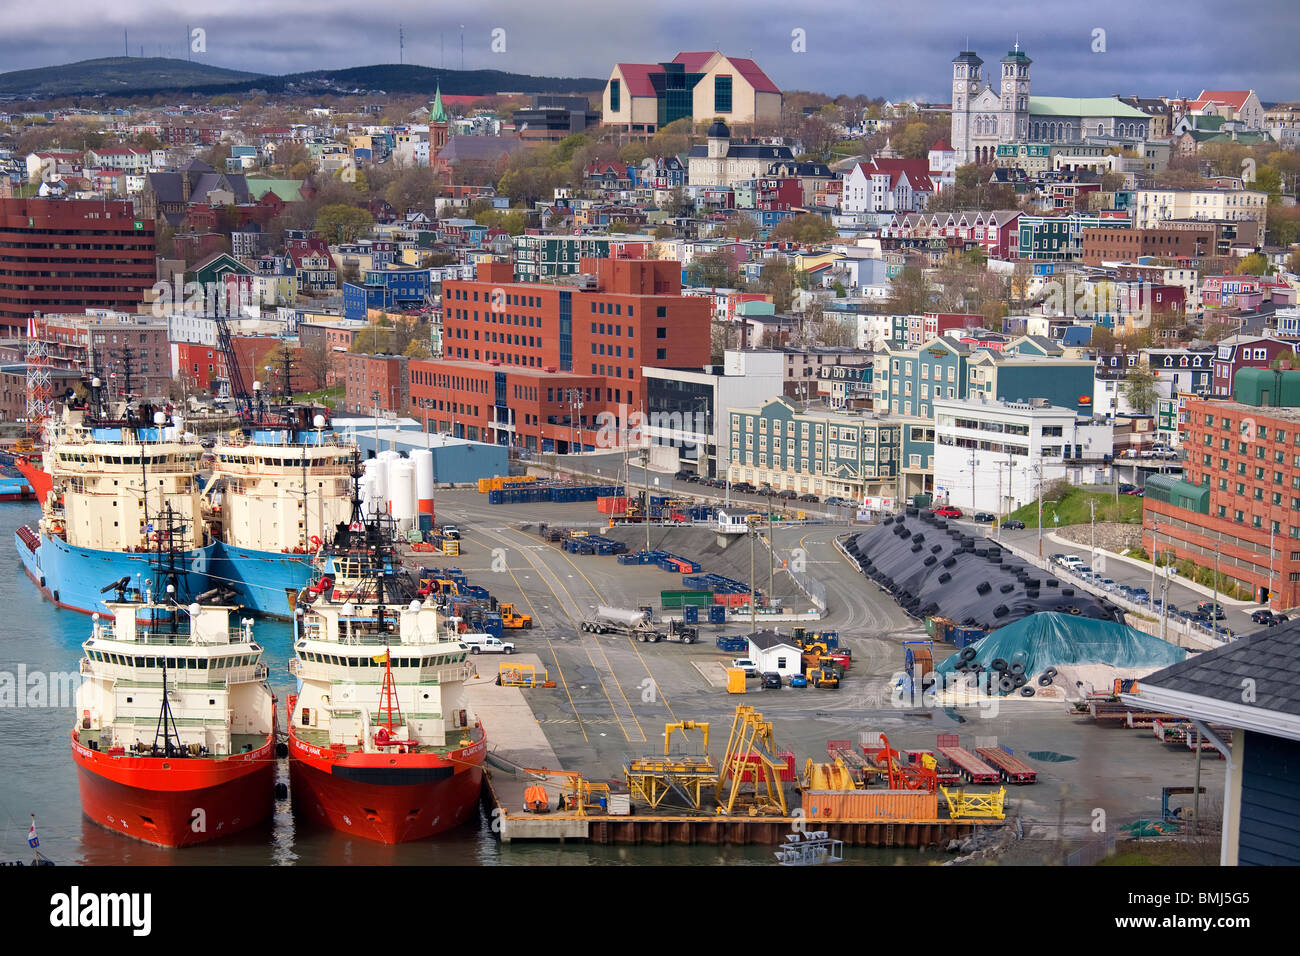 Ships along the waterfront of the city of St. John's, Newfoundland.  St. John's is the capital of Newfoundland and Labrador. Stock Photo